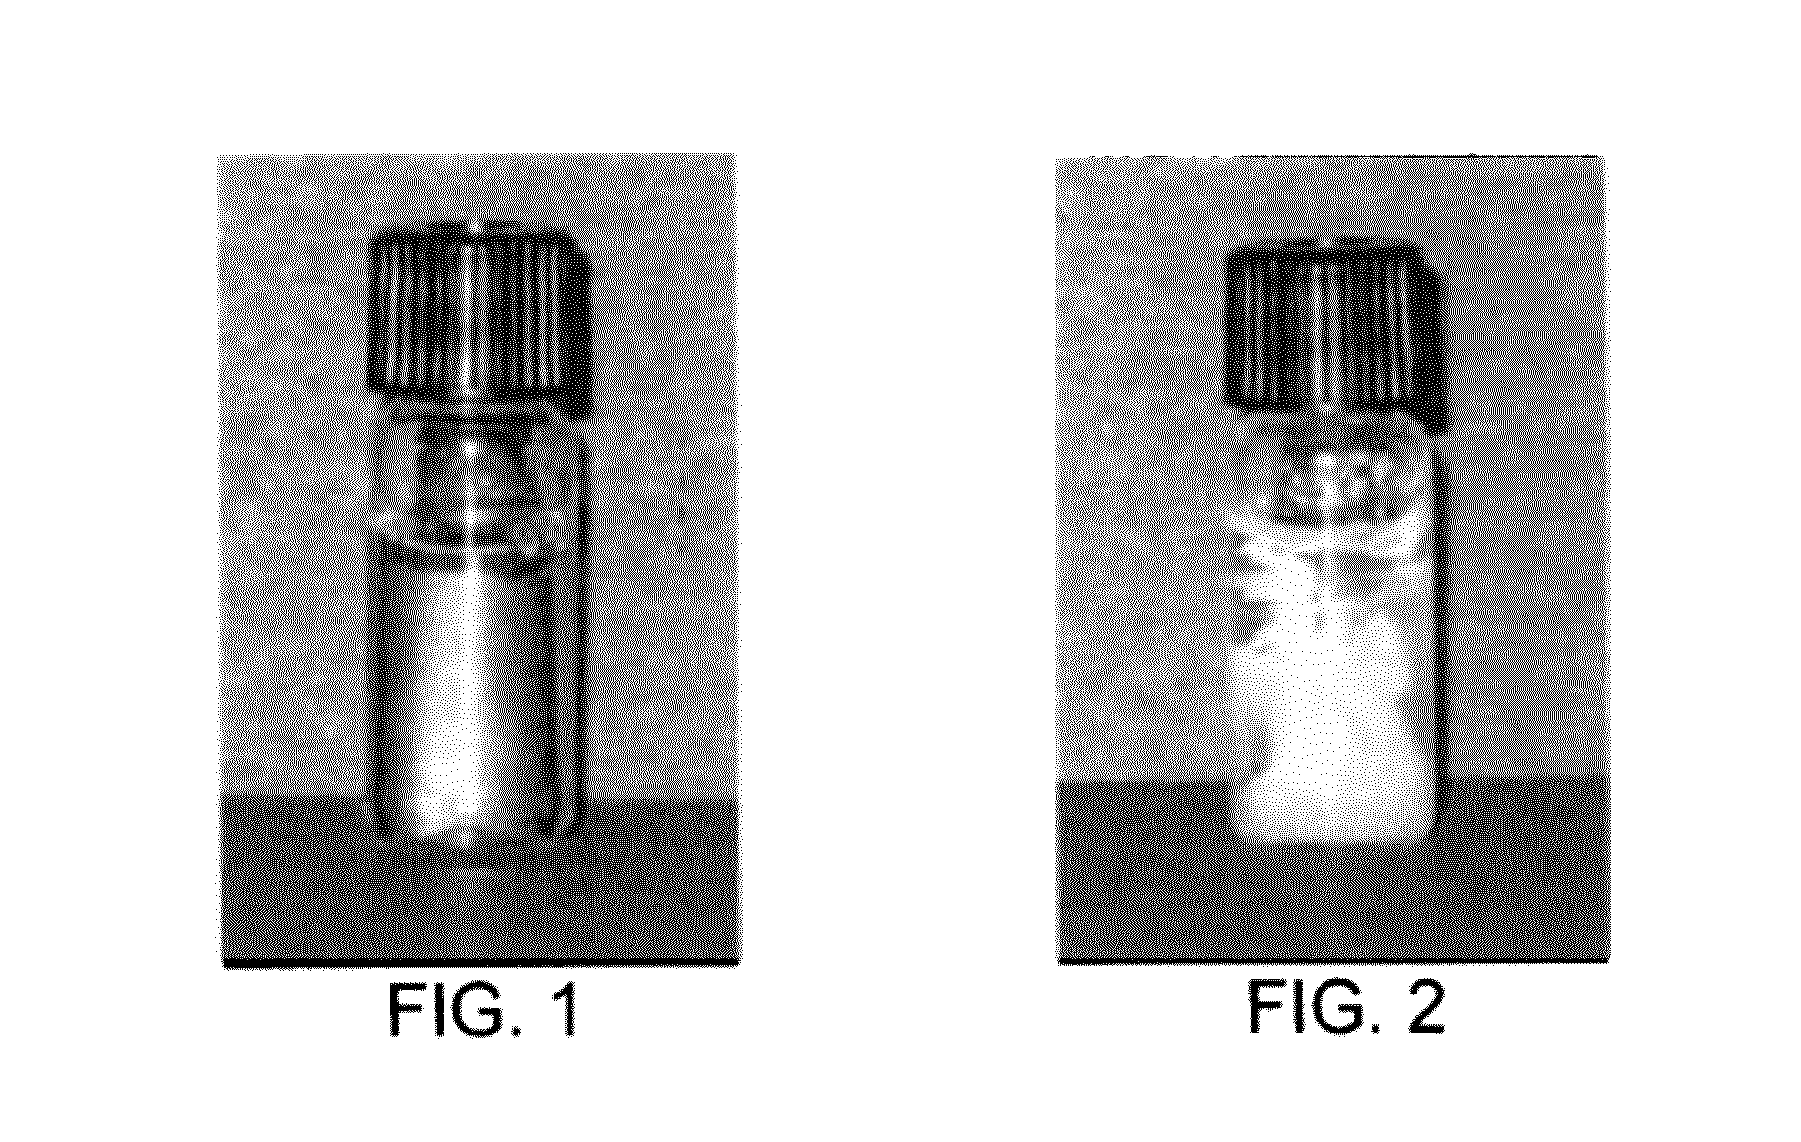 Thermo-responsive hydrogel compositions